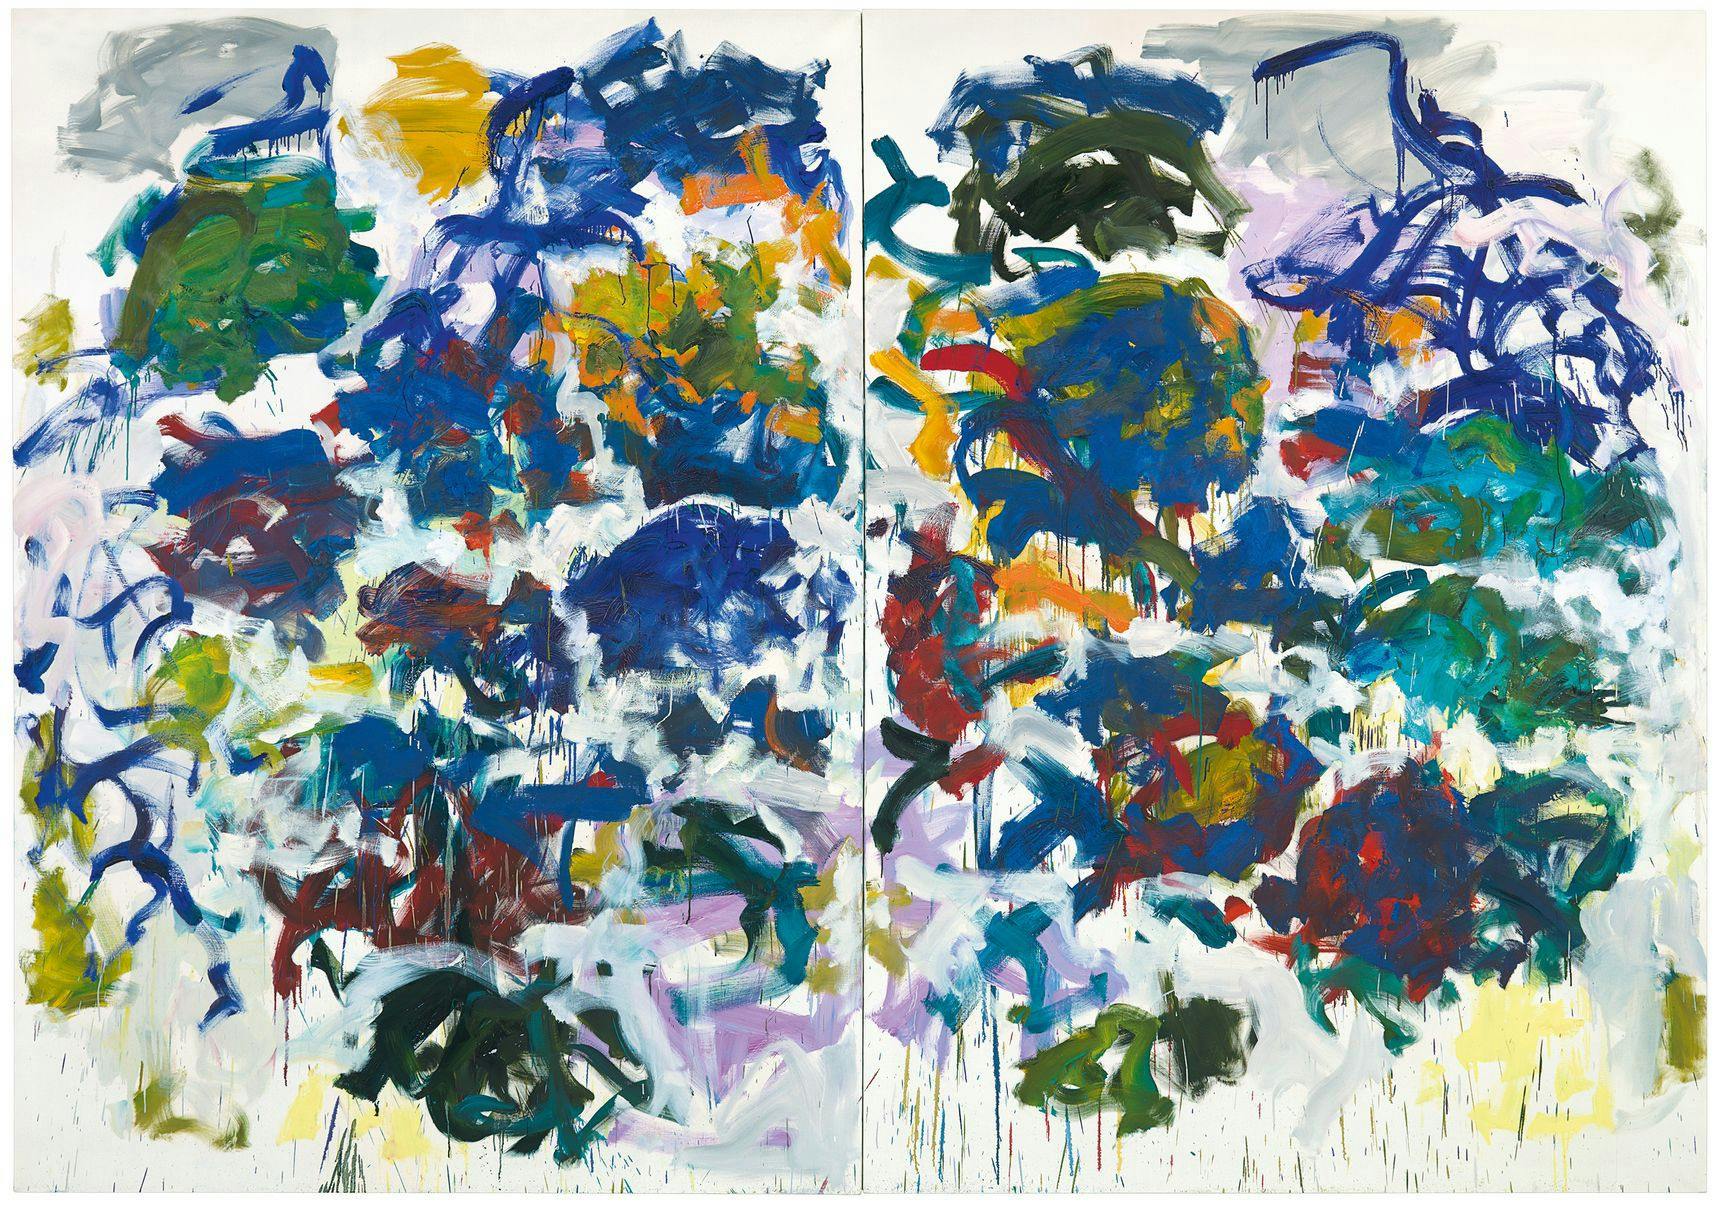 A painting by Joan Mitchell, titled Sunflowers, dated 1990-91.